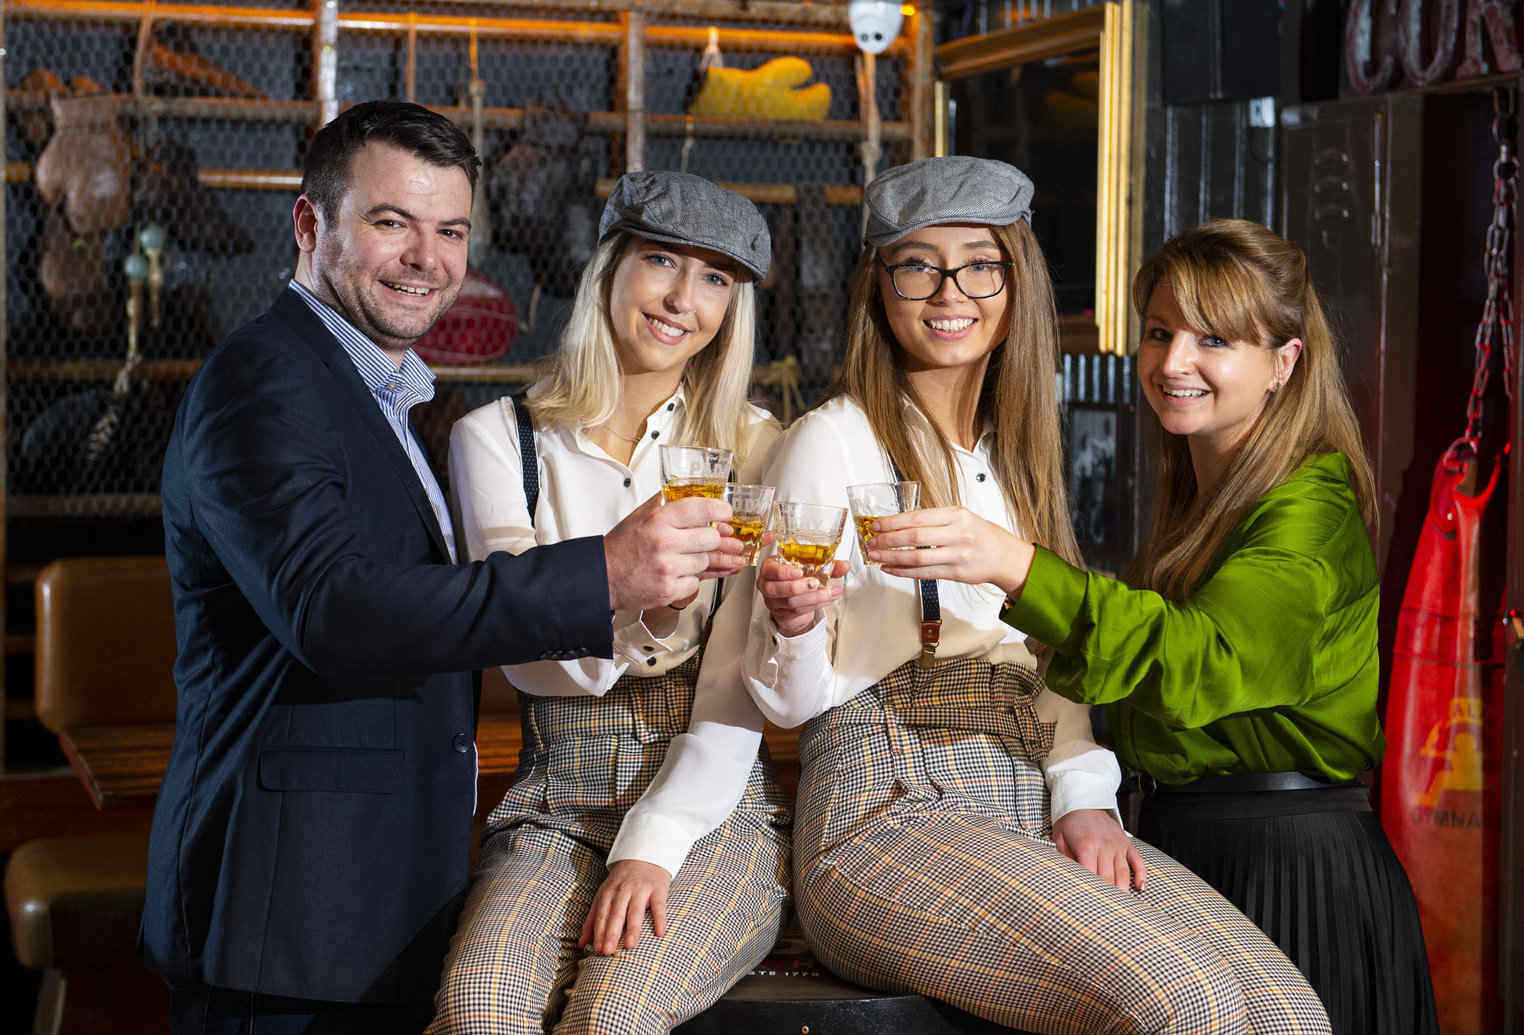 From left: Hi Spirits Brand Development Manager Alan Keane with Brand Ambassadors Sarah McWhinney, Lucy Fitzgibbon and Siobhan Costello at Paddy Irish Whiskey’s ‘The Spirit of Paddy’ launch event in Rearden’s Bar, Cork.